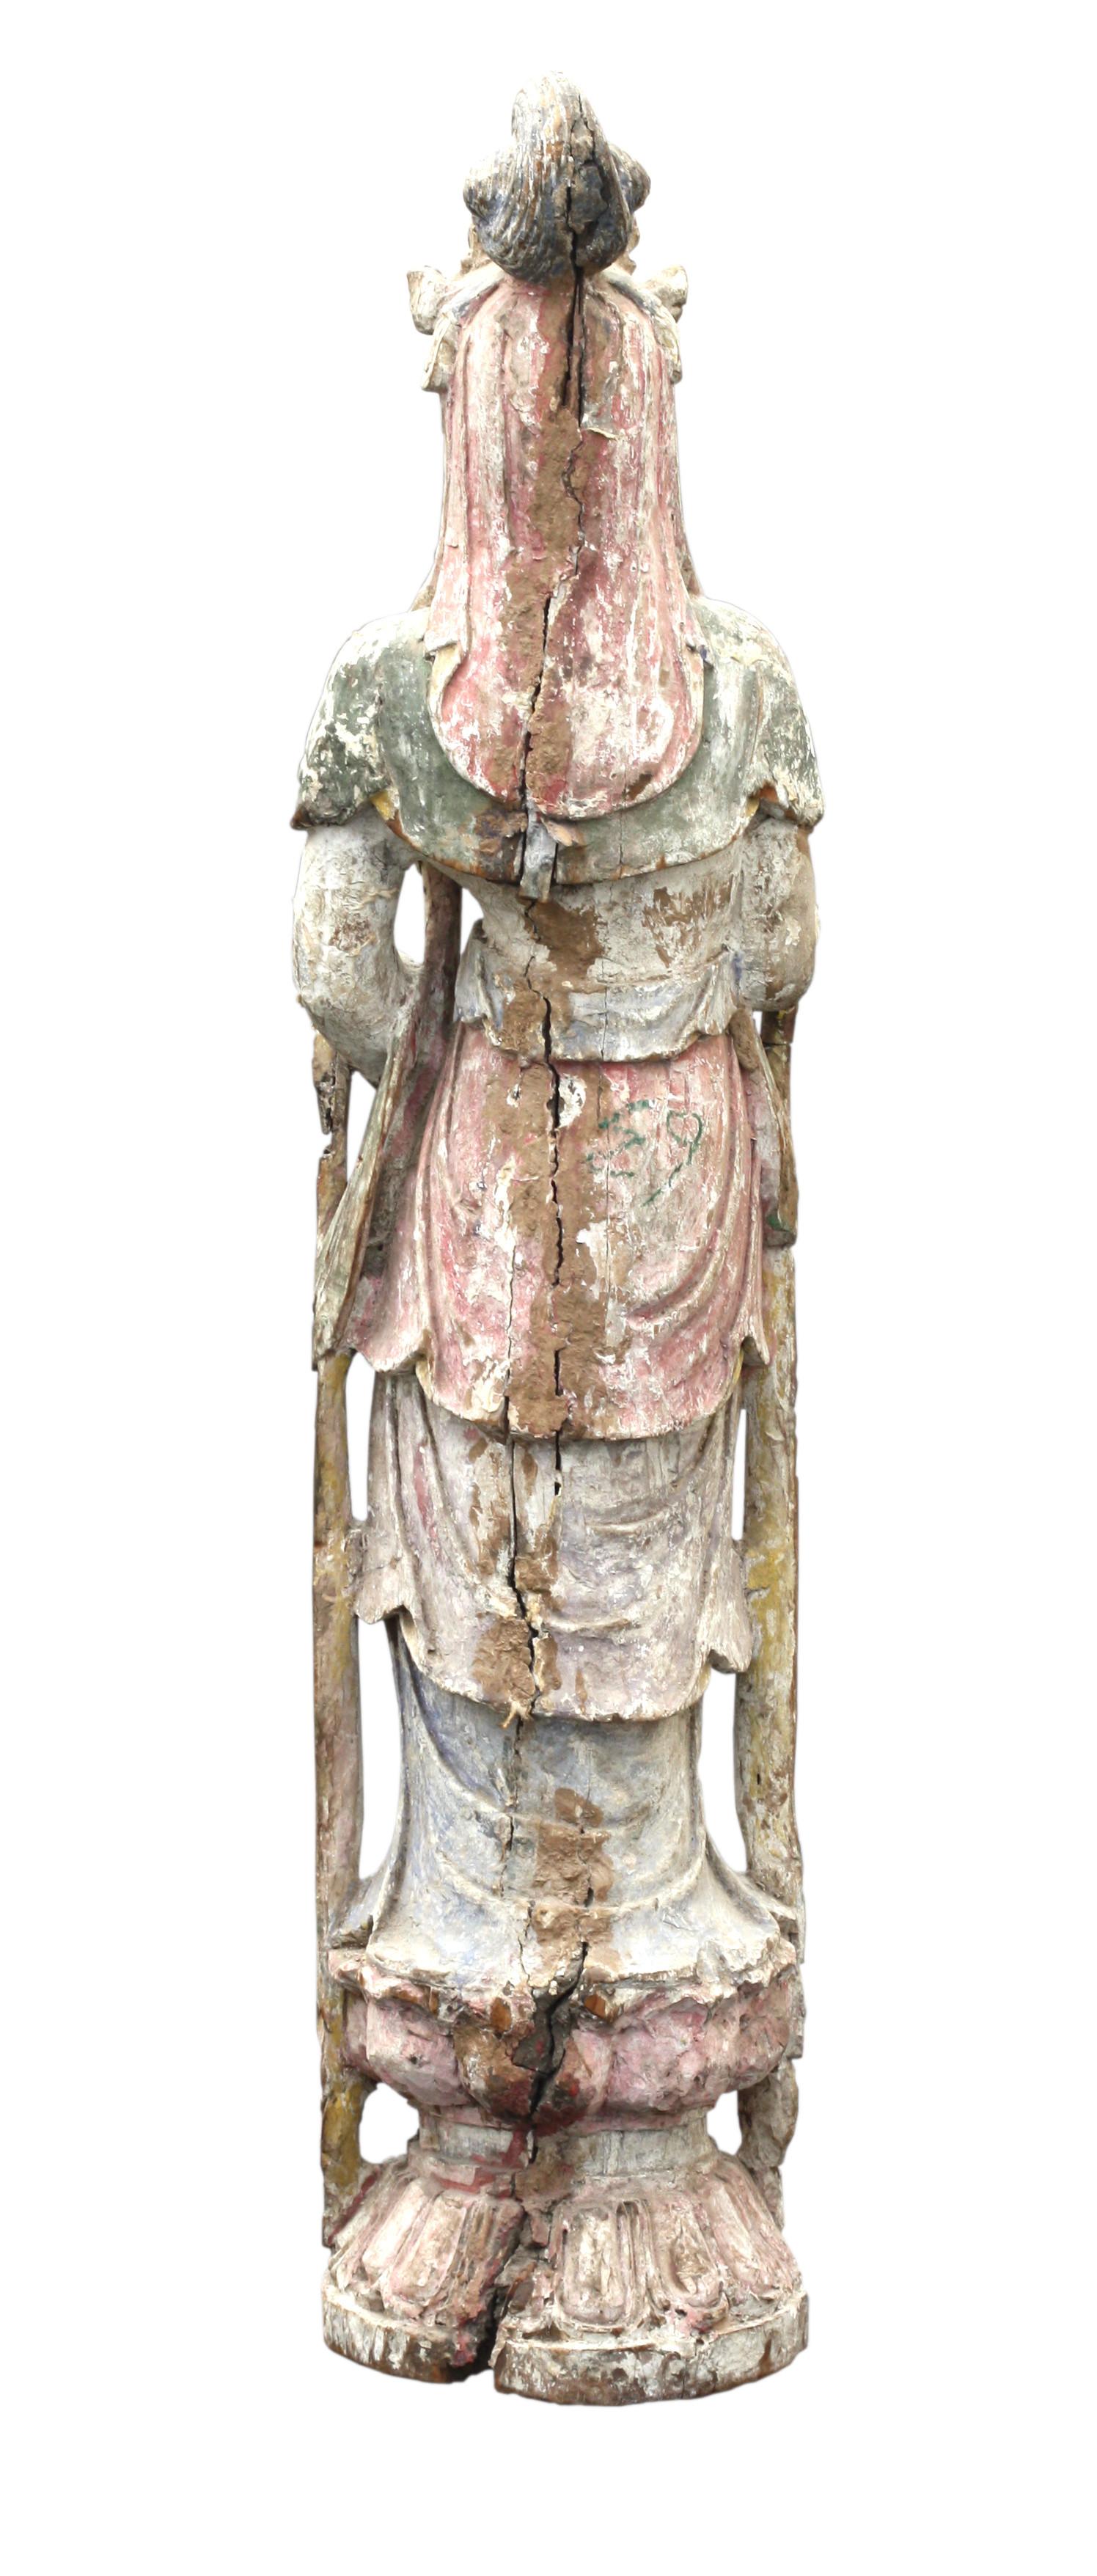 20th Century Chinese Polychrome-Decorated Carved Wood Figure of a Bodhisattva For Sale